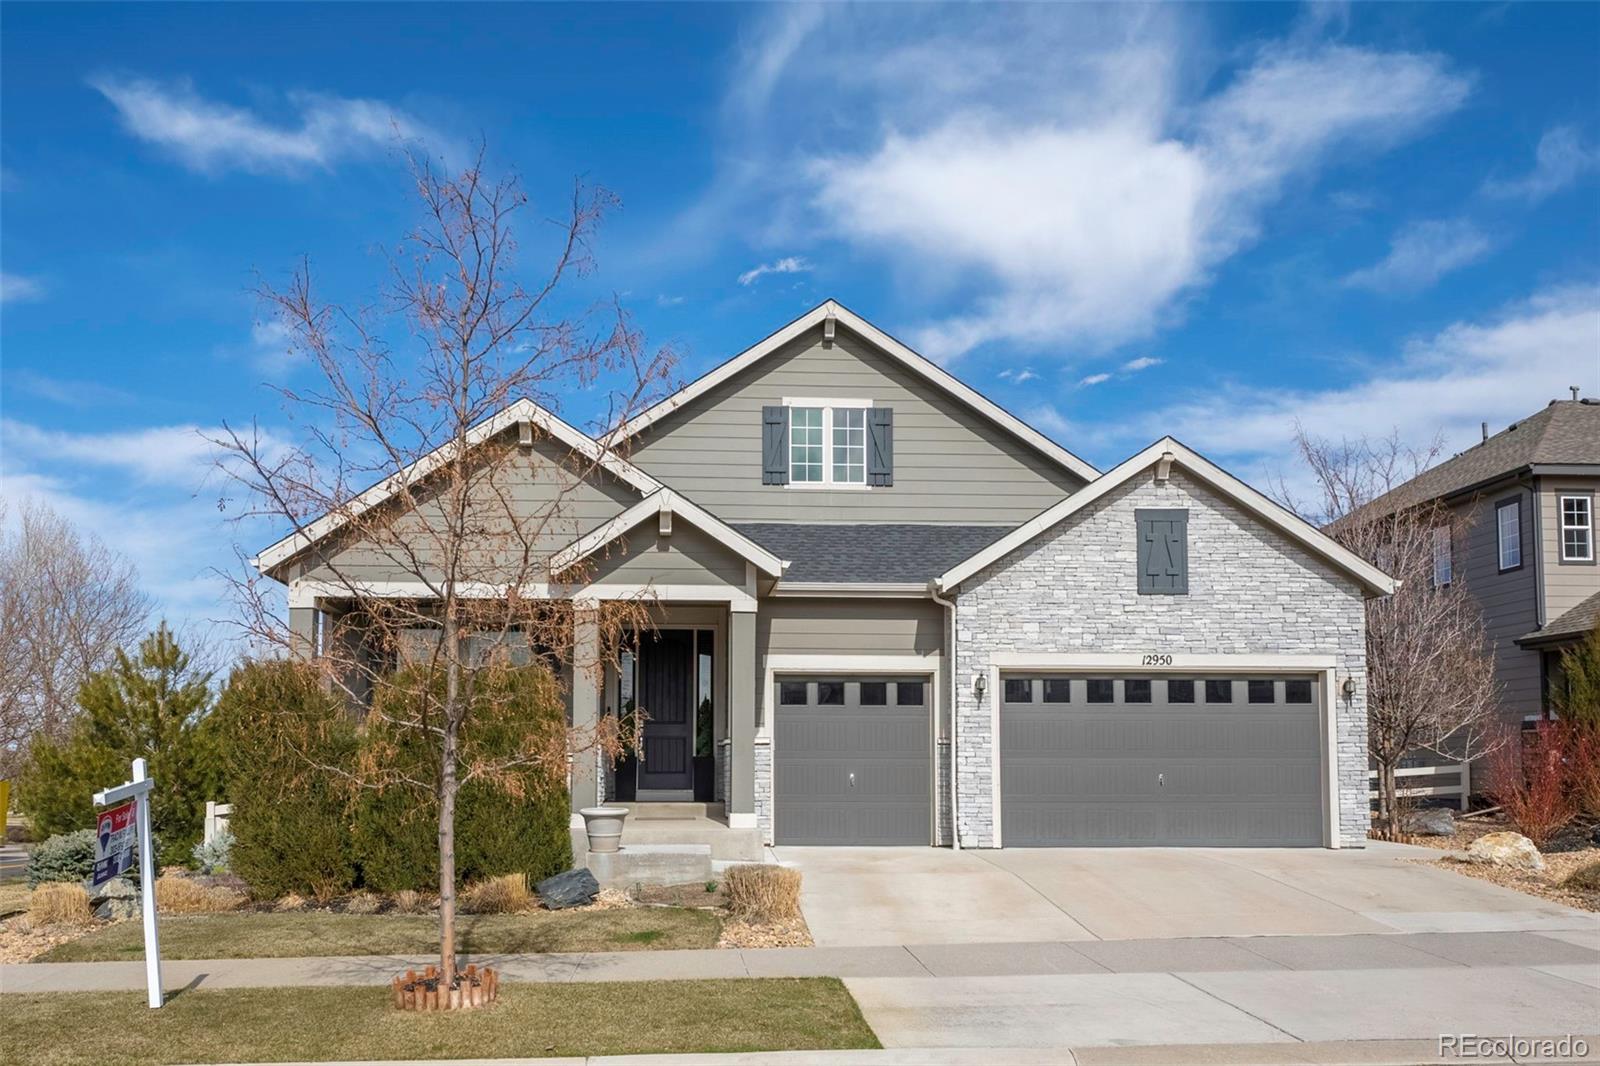 Report Image for 12950 S Cory Street,Parker, Colorado